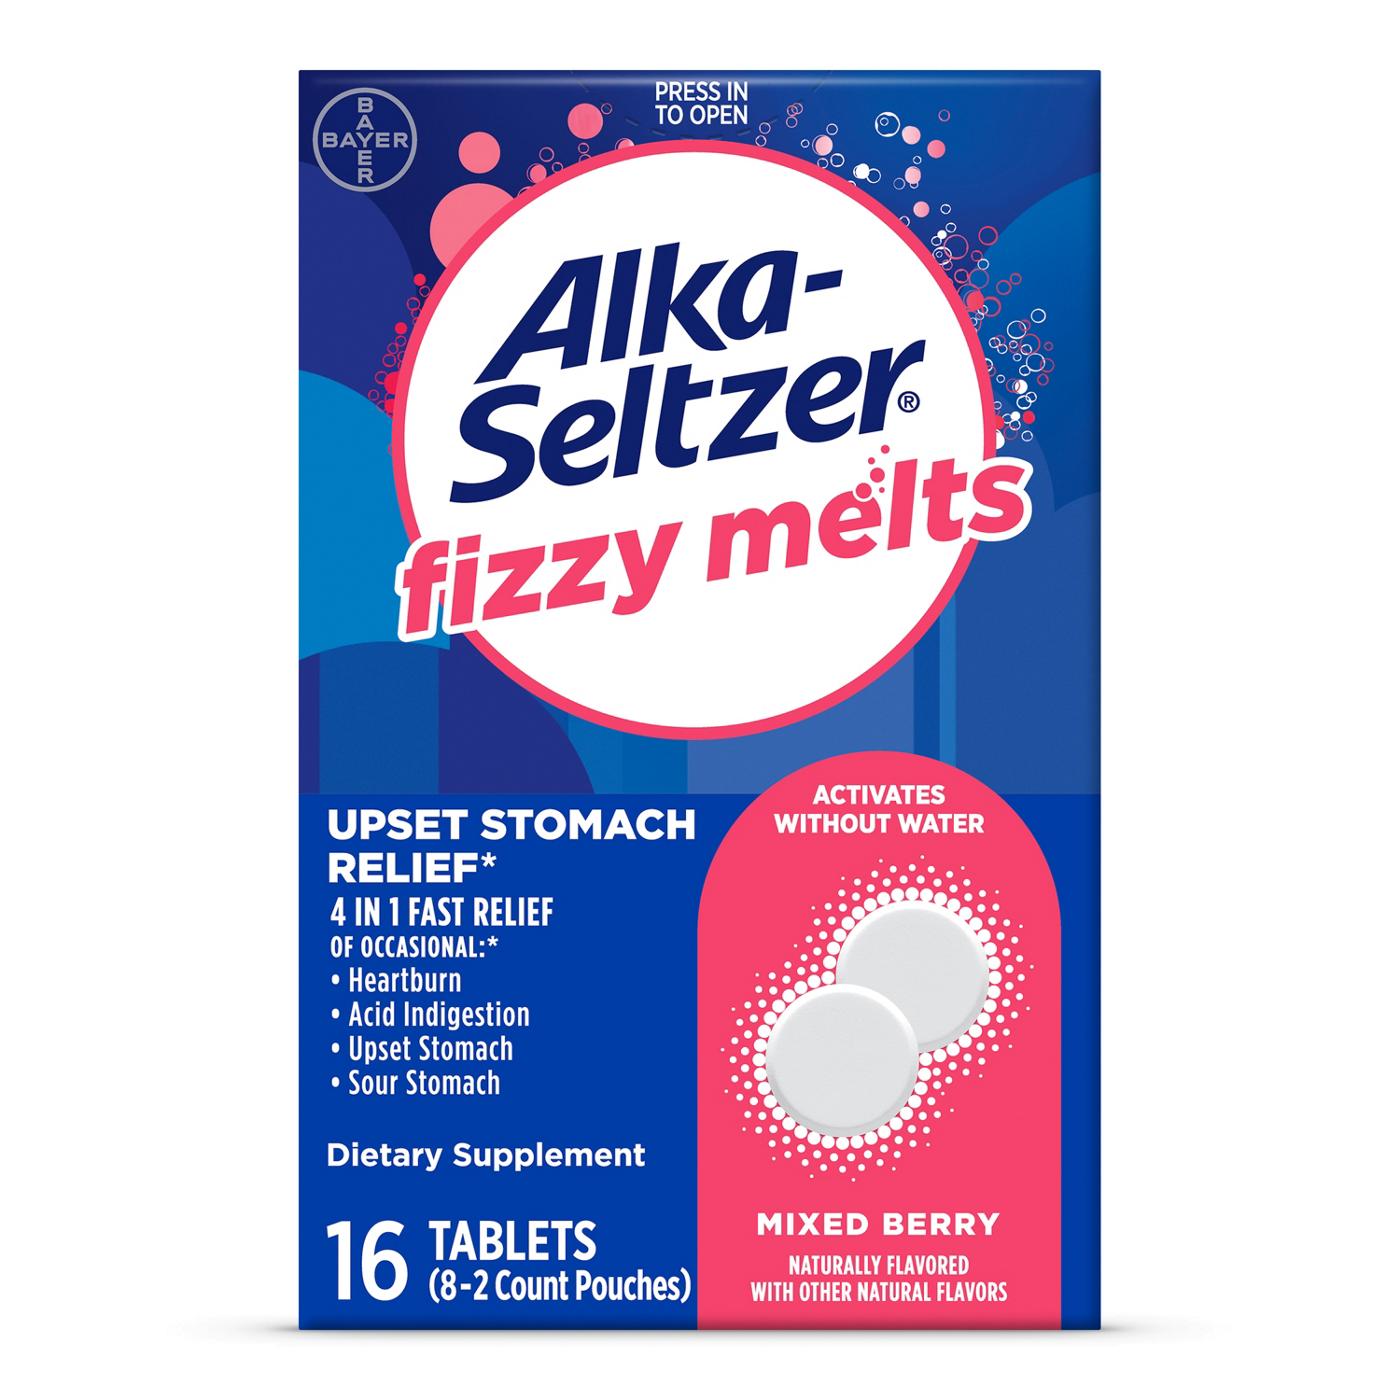 Alka-Seltzer Fizzy Melts Tablets - Mixed Berry; image 1 of 6